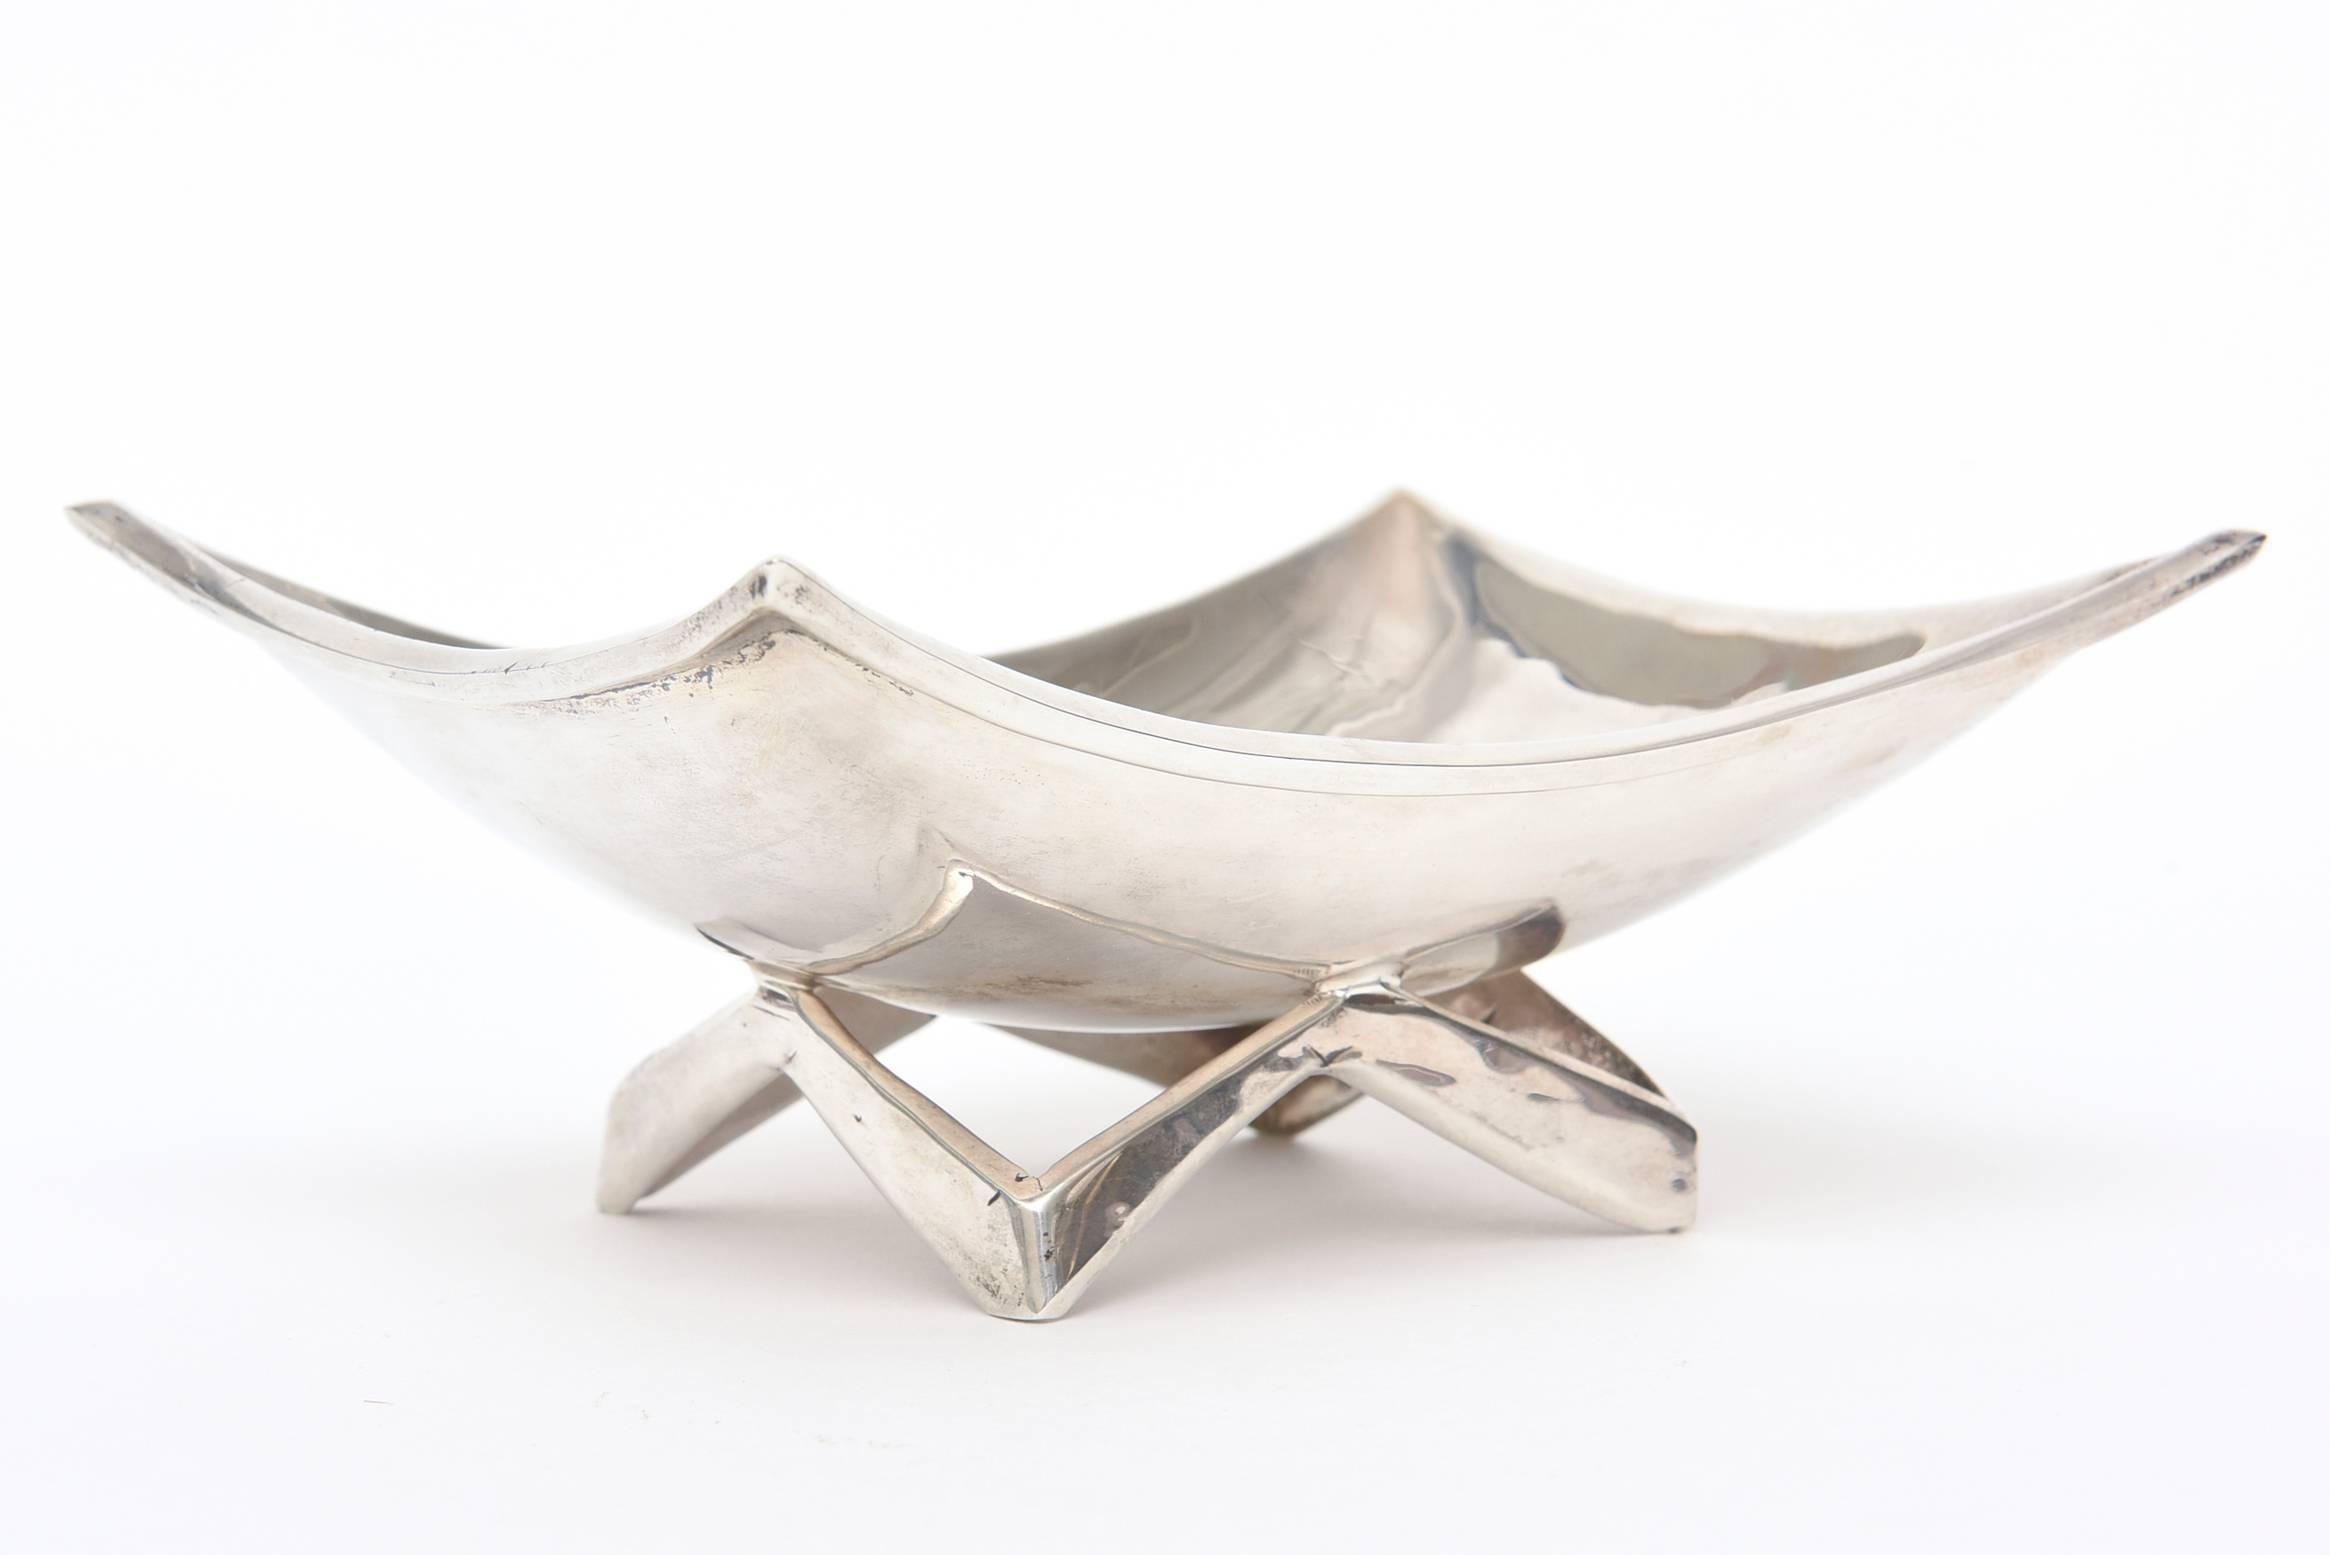 This lovely small hallmarked sterling silver modernist bowl is signed.
The shape is sculptural and the architectural sterling base acts as a pedestal.
It has nice weight to it.
It is marked 925 JLR 0.92. It is by one of the Mexican silversmith's